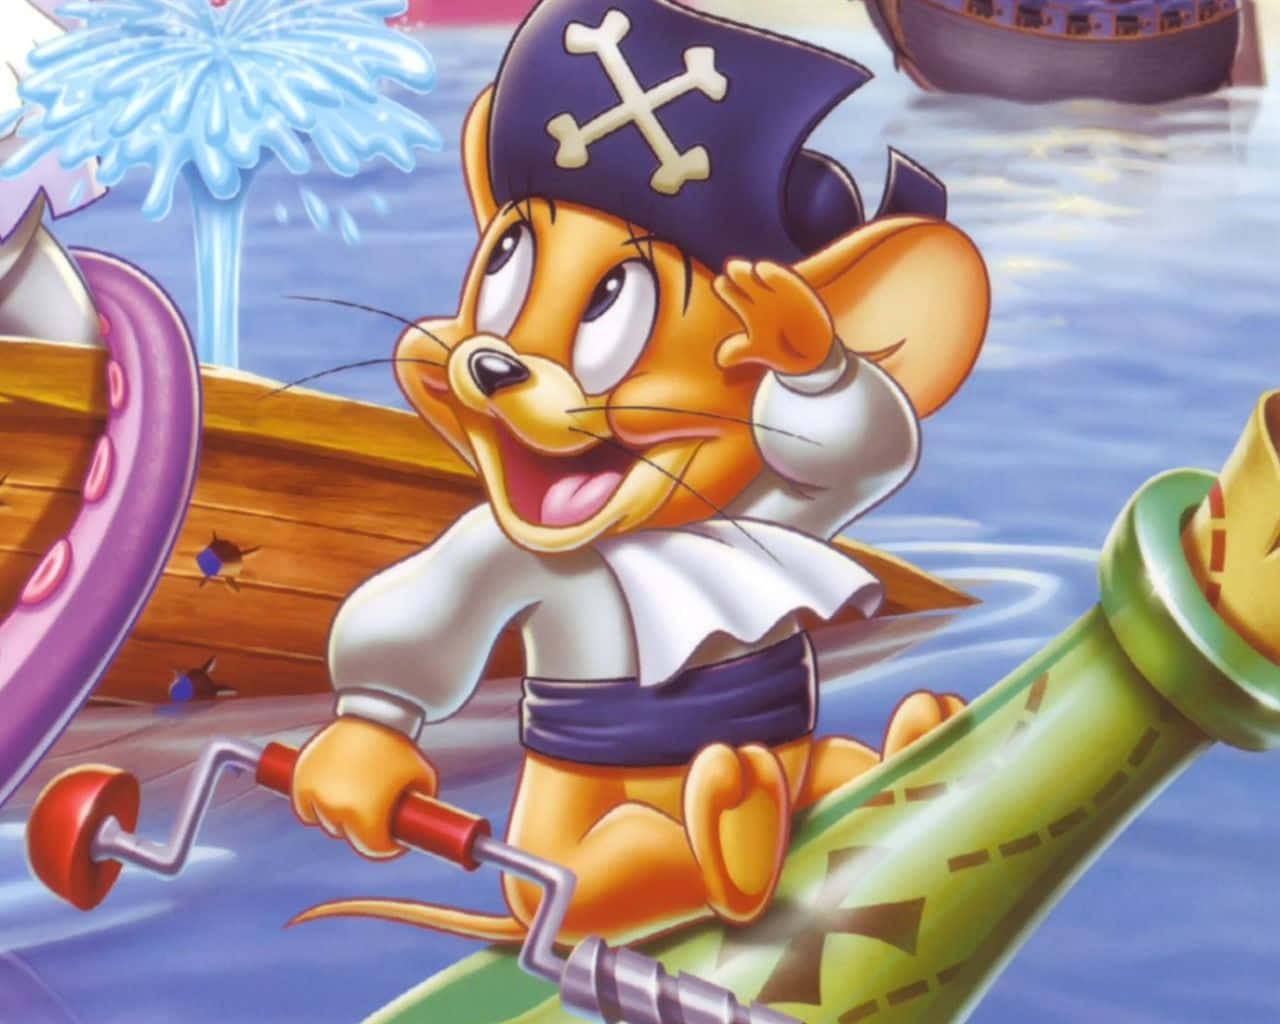 A Cartoon Mouse In A Pirate Costume Is Riding A Boat